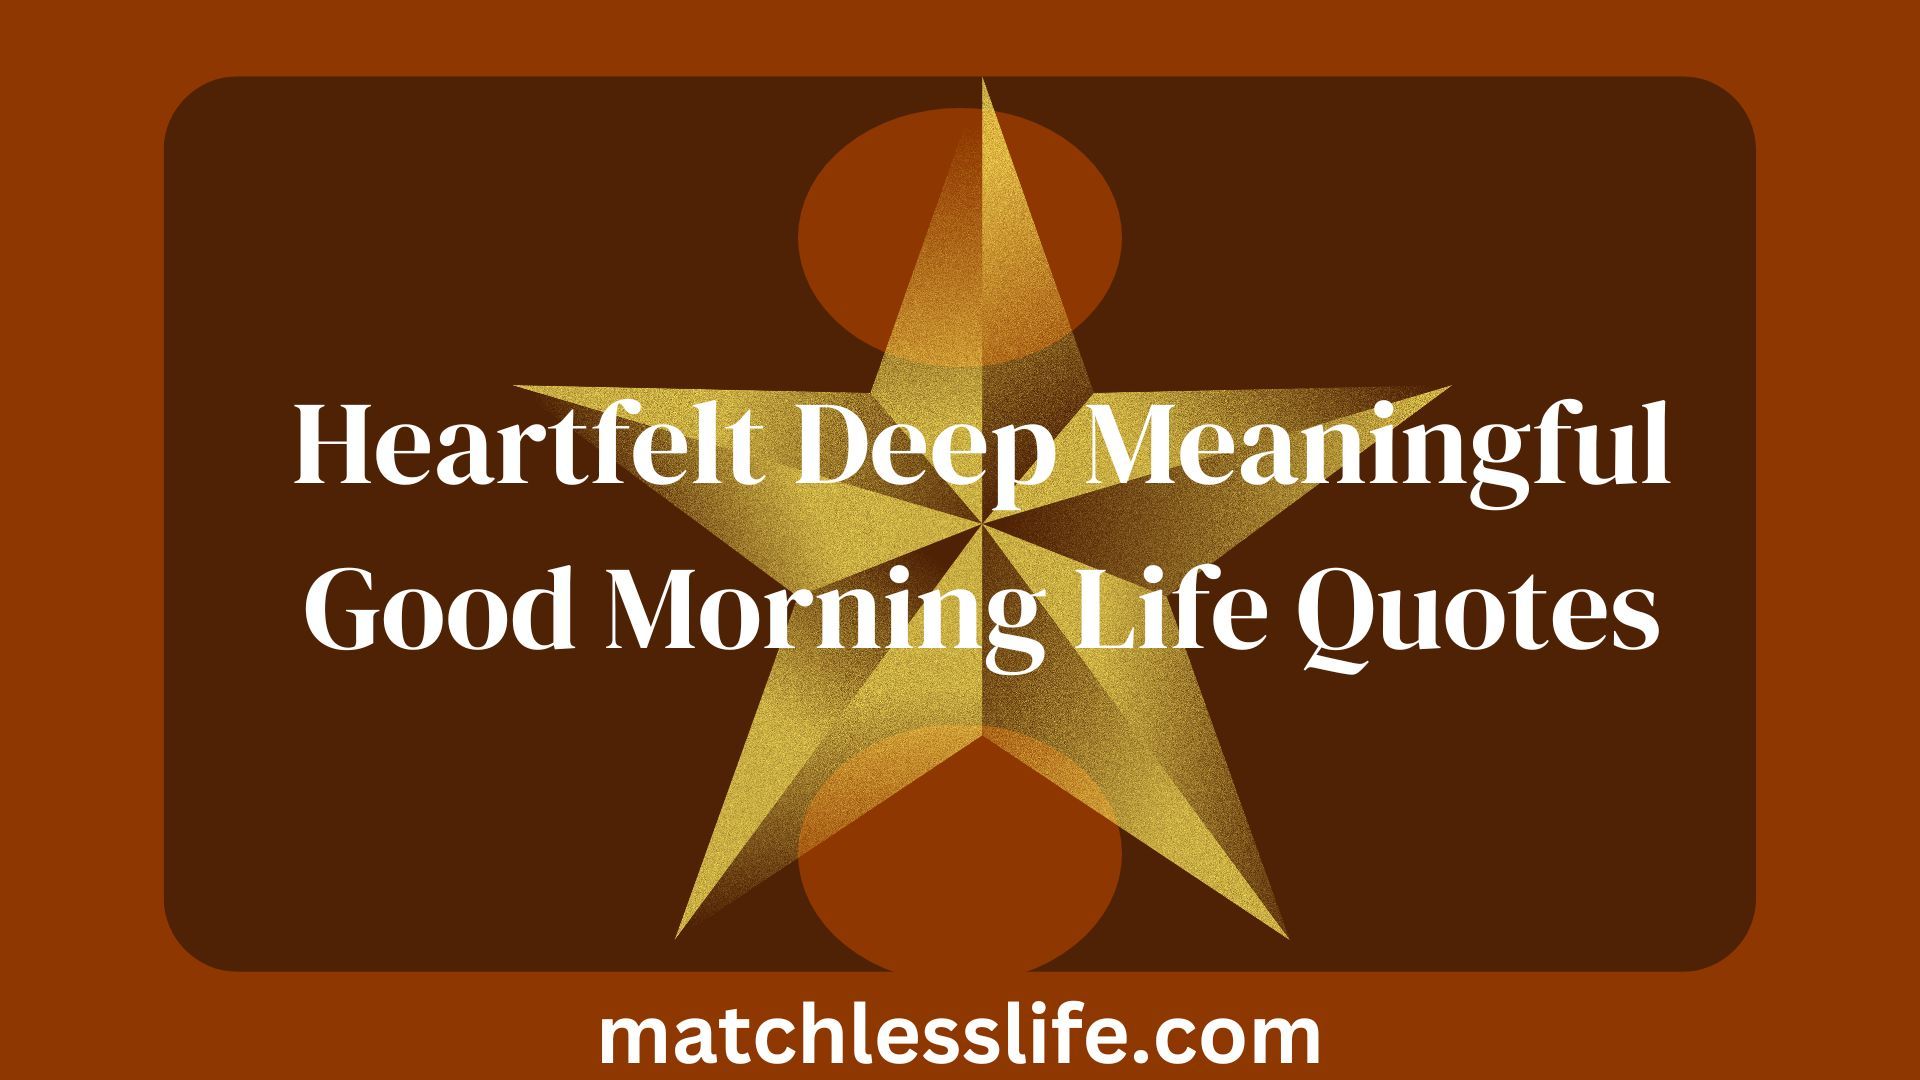 Heartfelt Deep Meaningful Good Morning Life Quotes